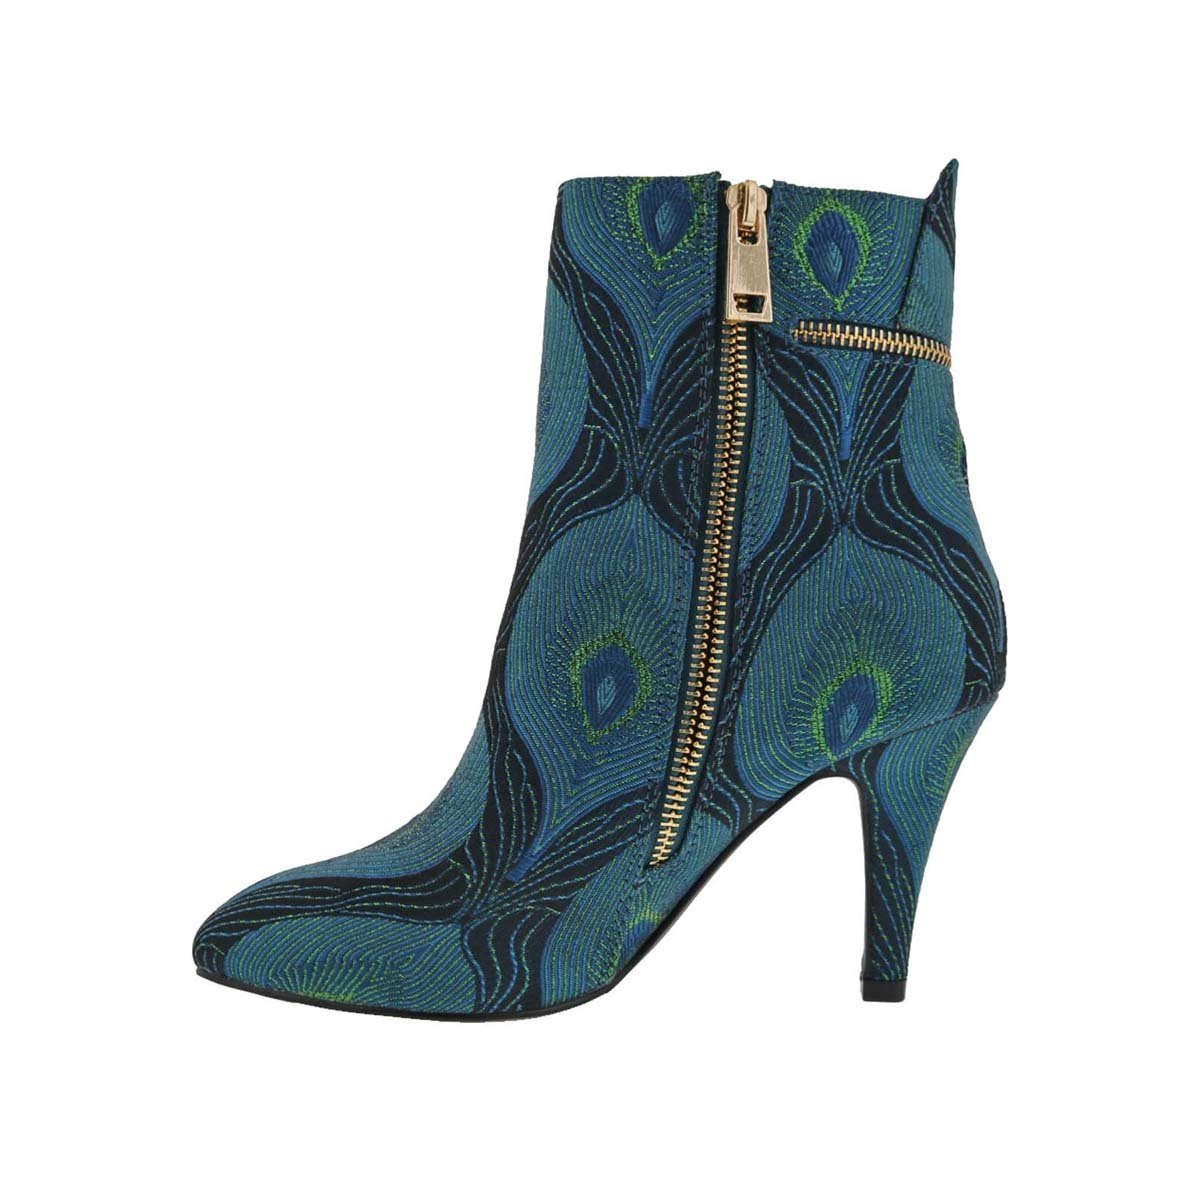 BELLINI CLAUDETTE WOMEN DRESSY ANKLE BOOT IN TURQUOISE COMBO - TLW Shoes